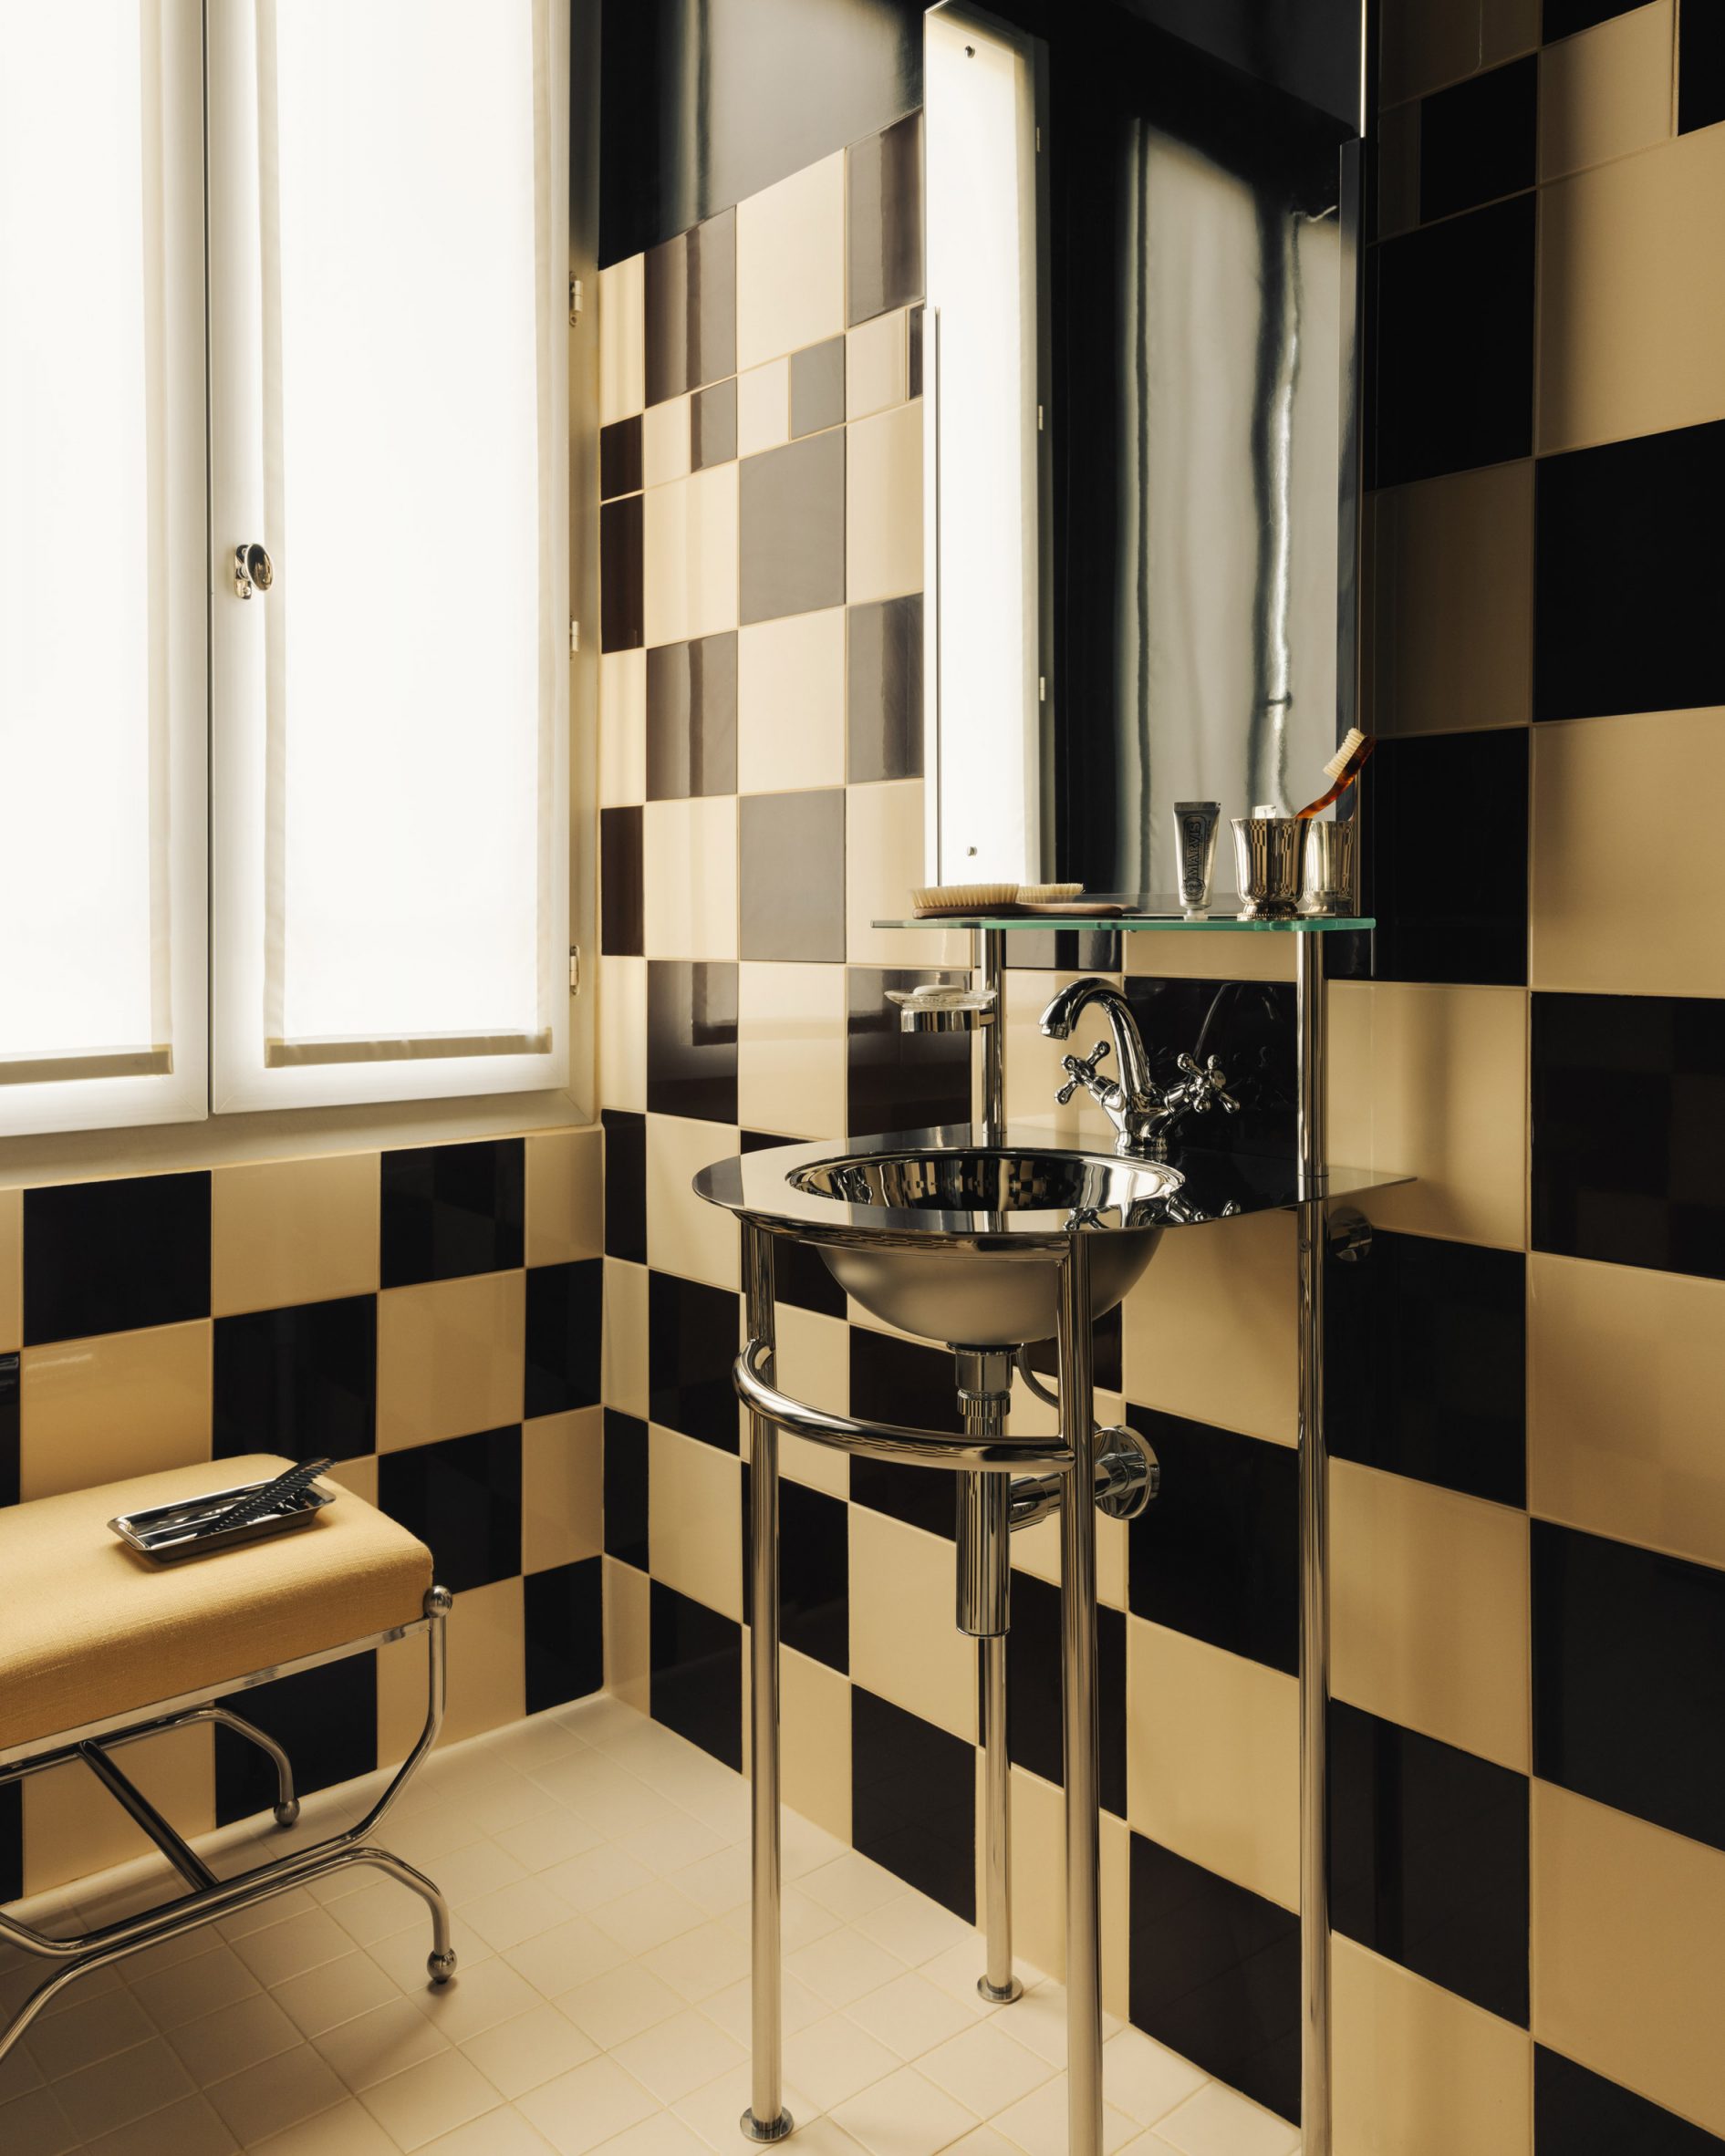 Bathroom with chequered tiles